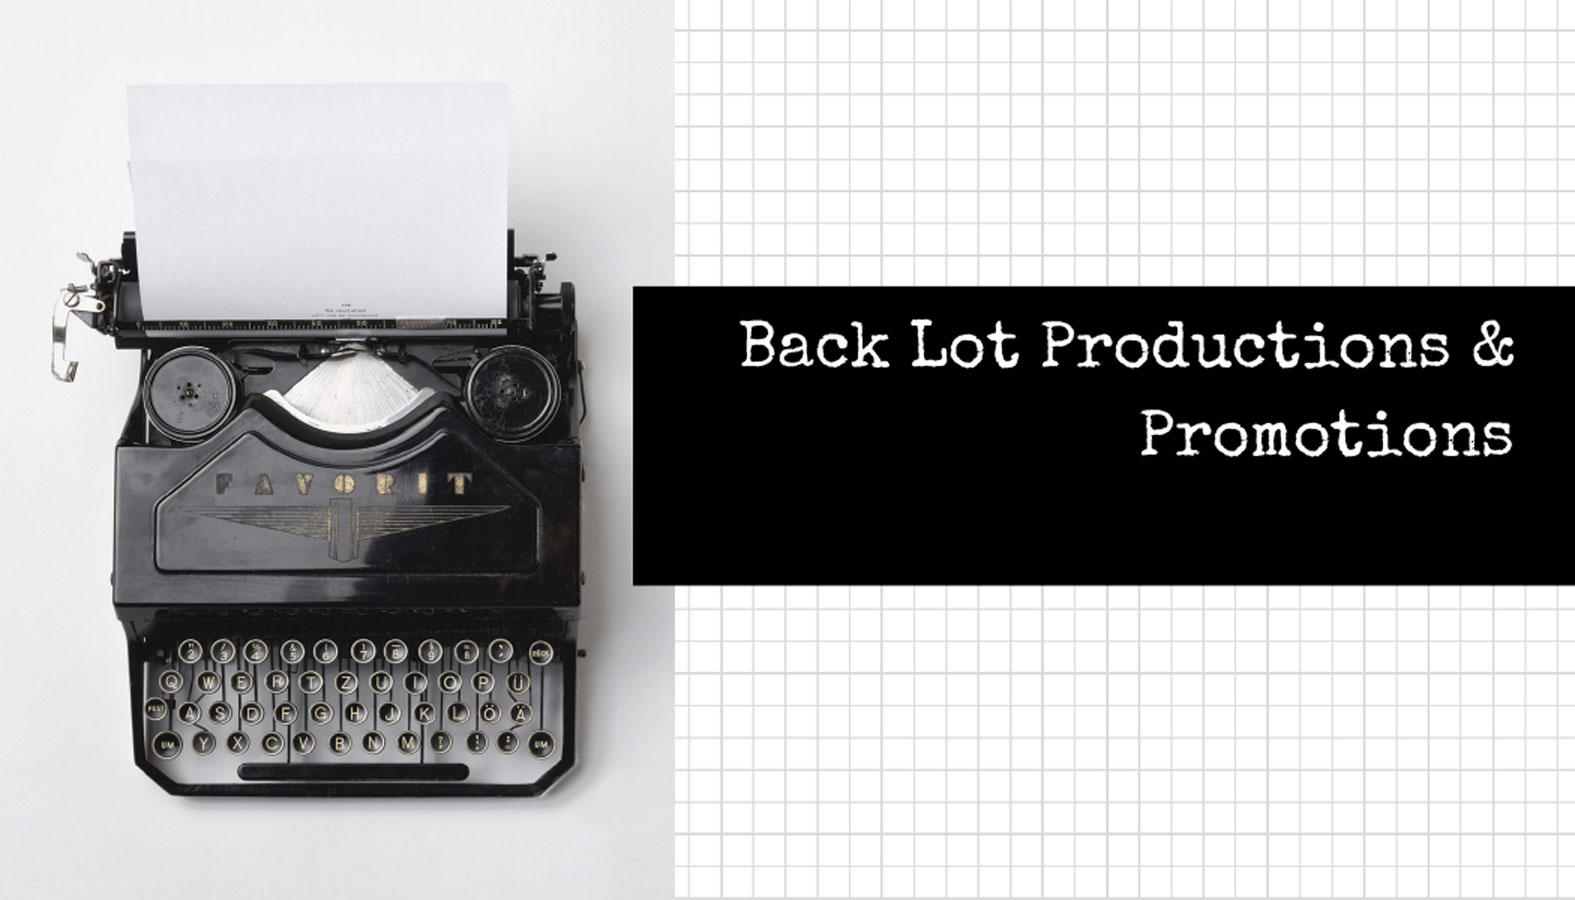 Back Lot Productions/Promotions